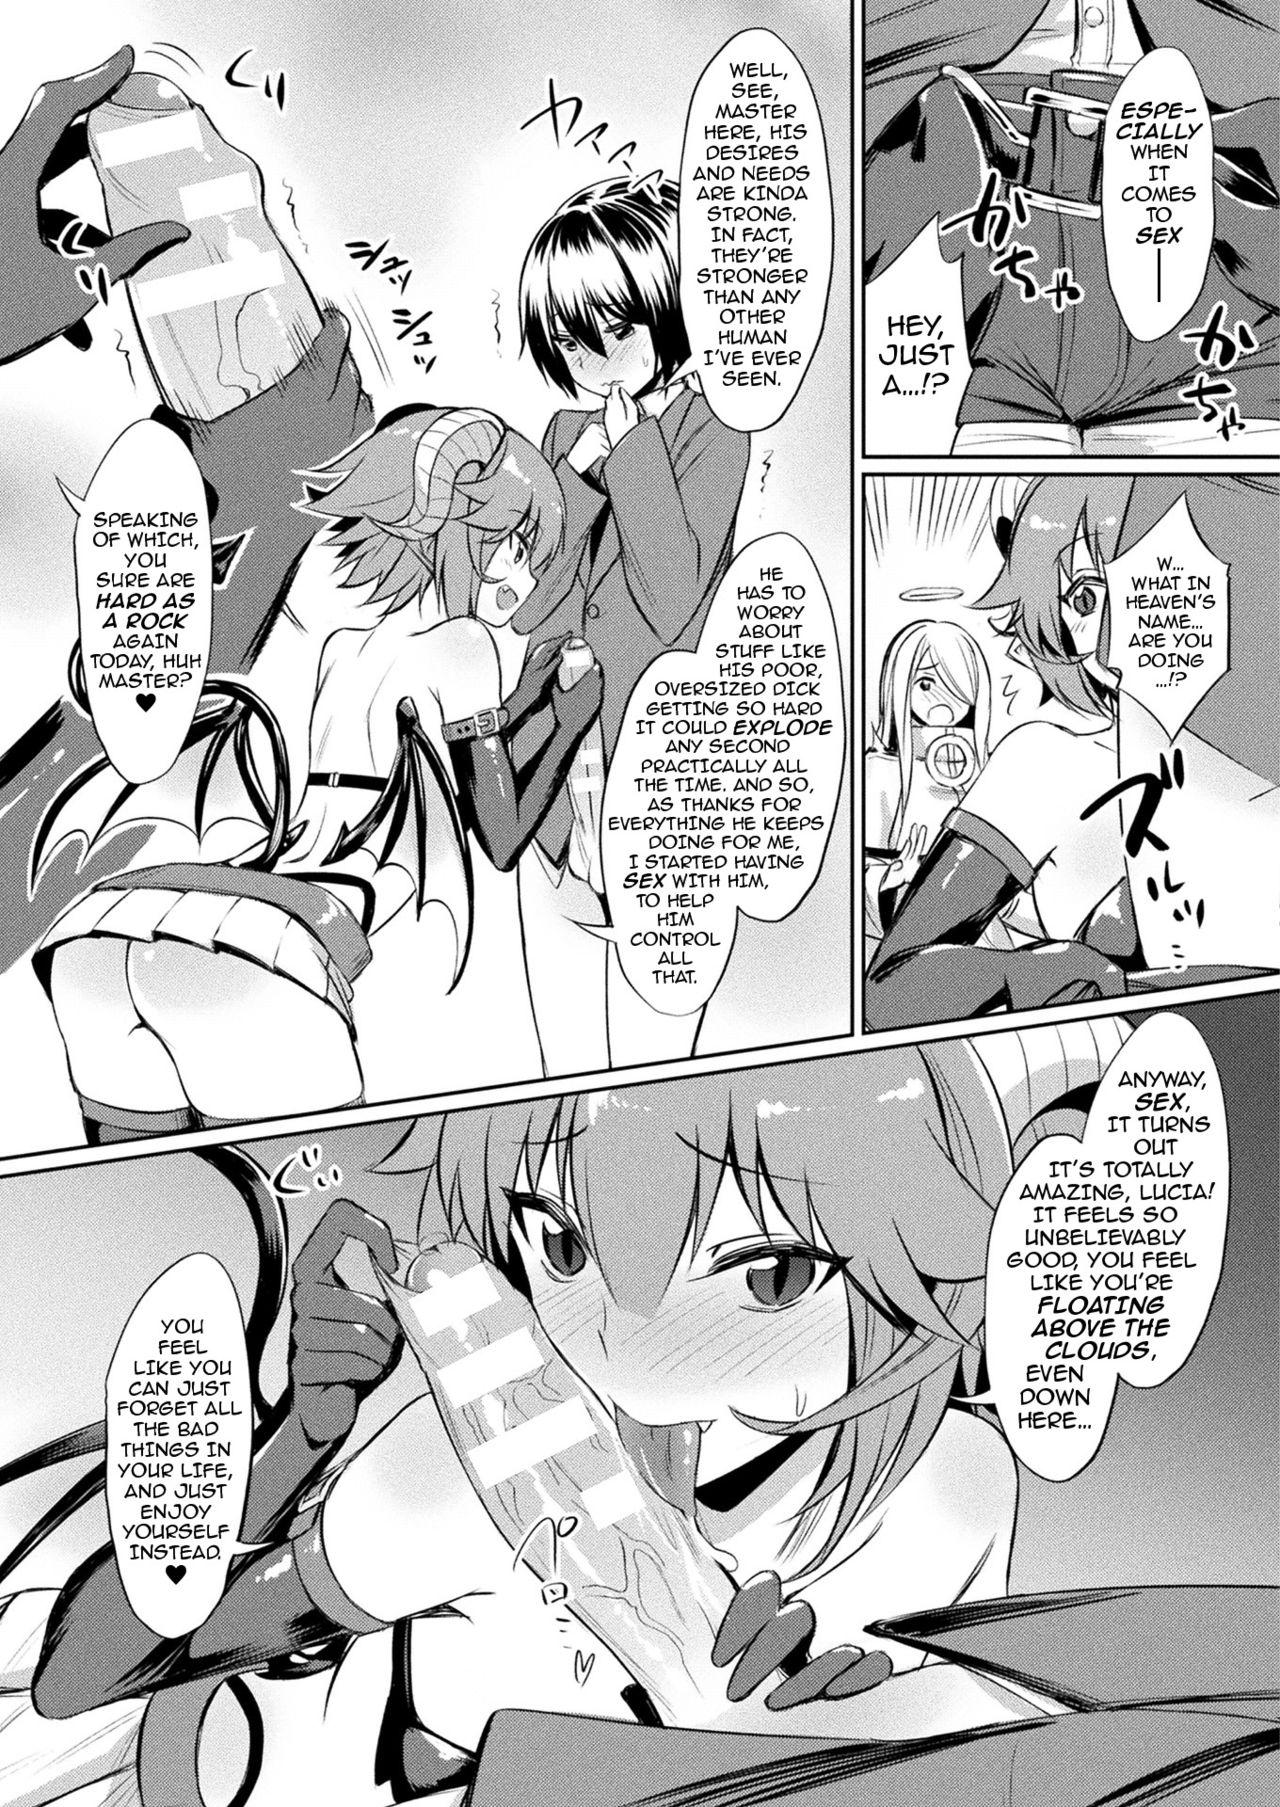 Police Kimochii Rakuten Shiyo | Let’s Enjoy the Pleasures of FALLING FROM GRACE Together Head - Page 5